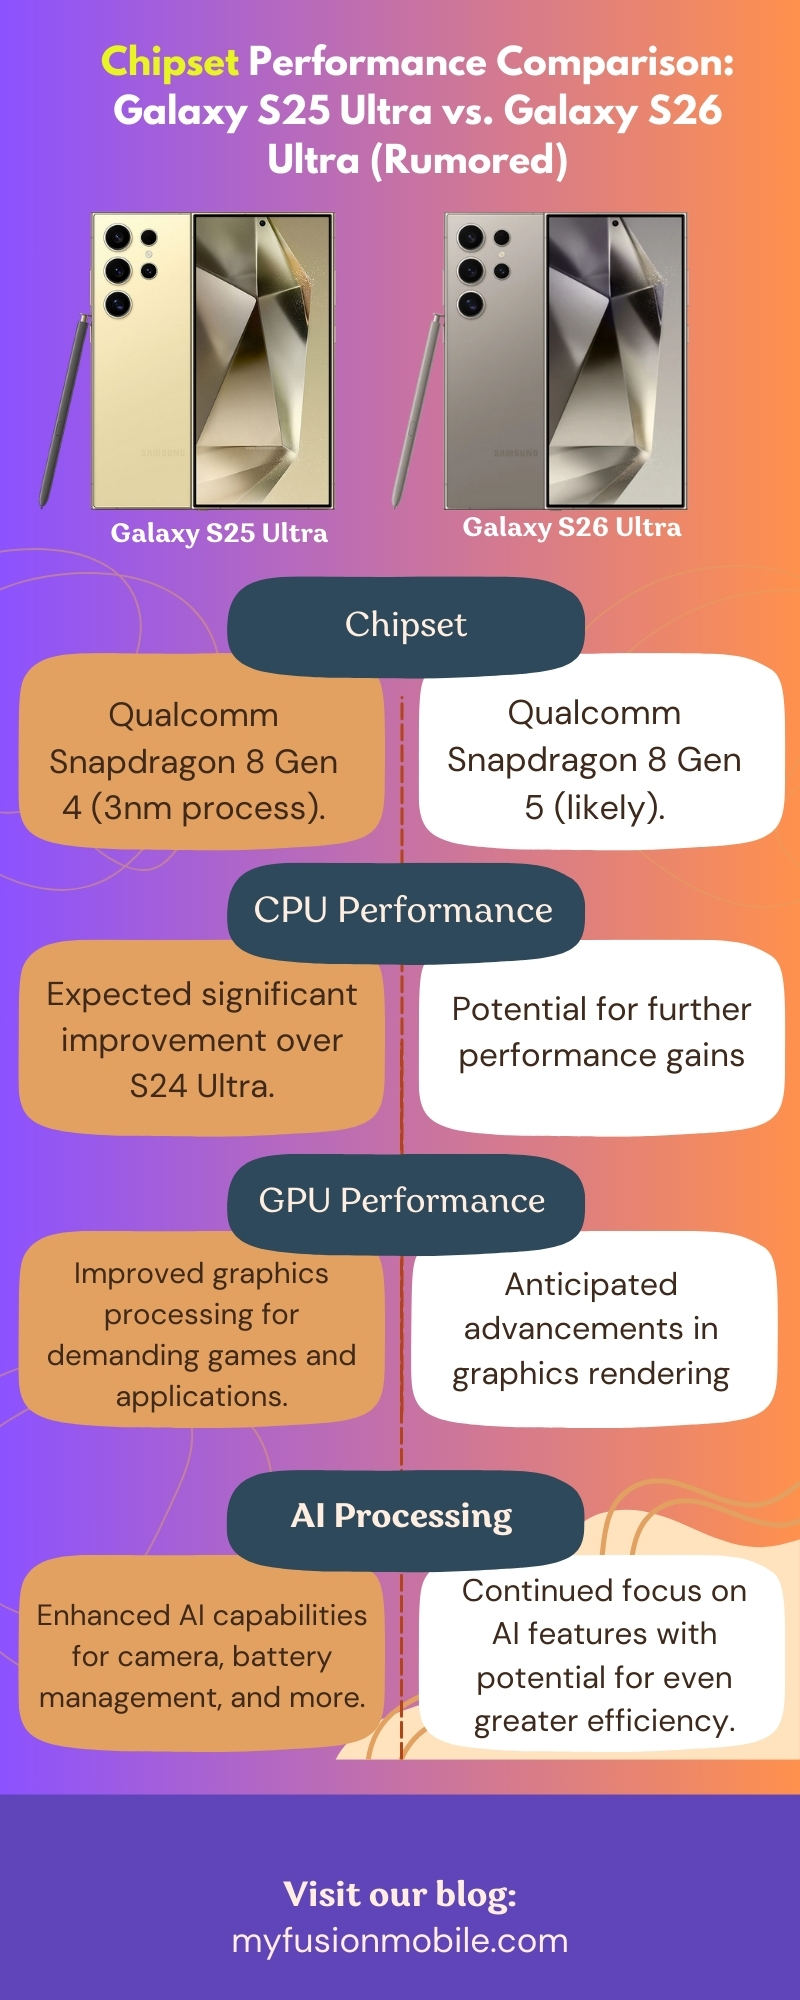 Chipset Performance Comparison: Galaxy S25 Ultra vs. Galaxy S26 Ultra (Rumored)